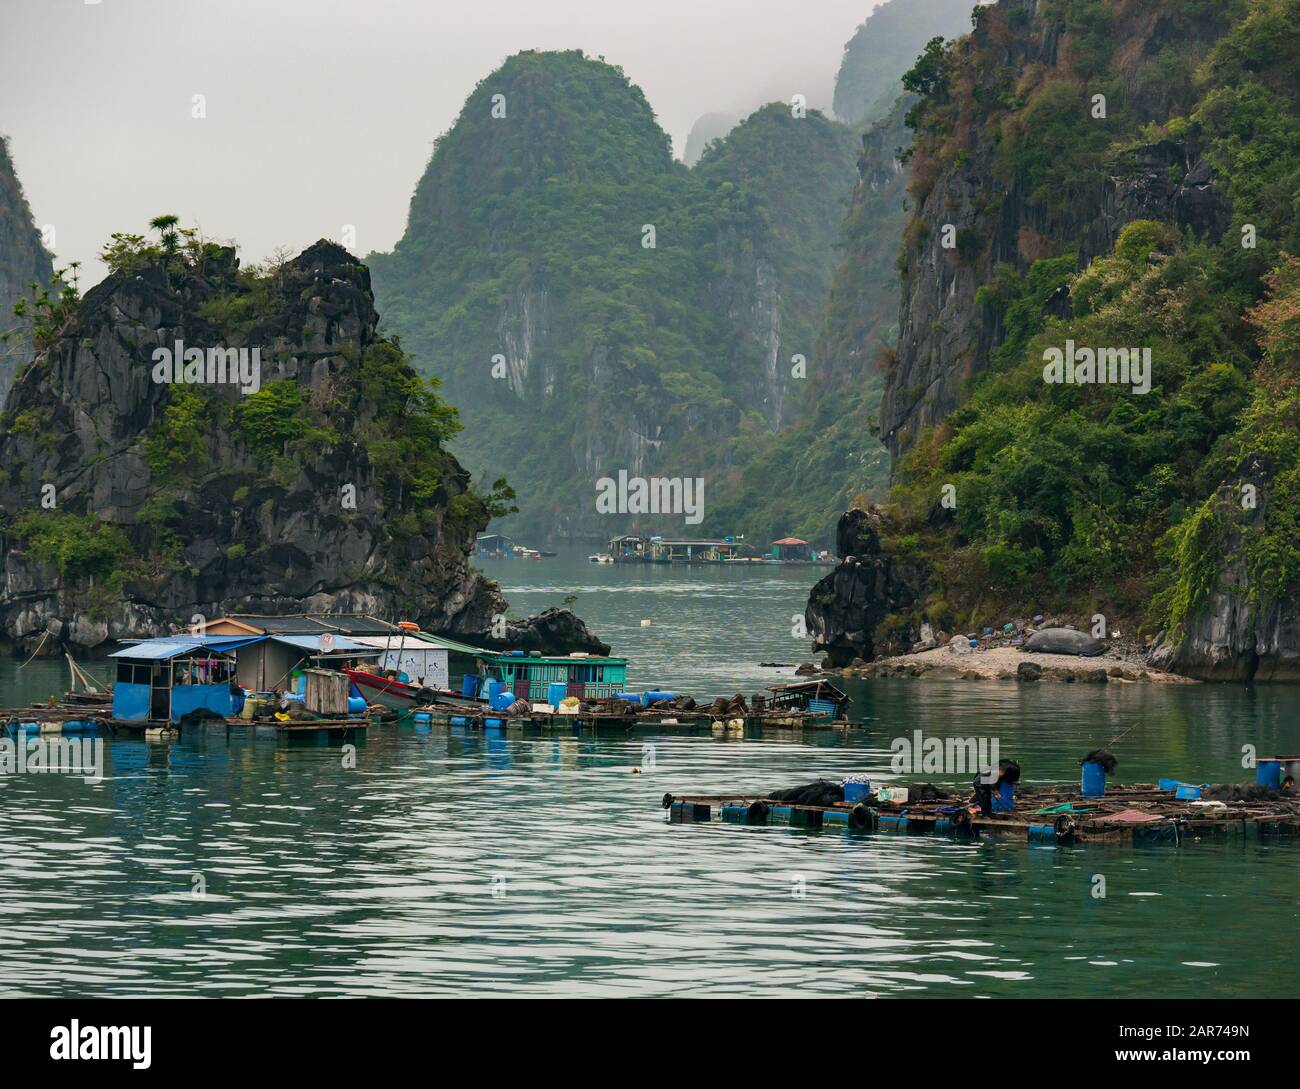 Fish farm in foggy weather with limestone karst rock formations, Lan Ha Bay, Vietnam, Asia Stock Photo